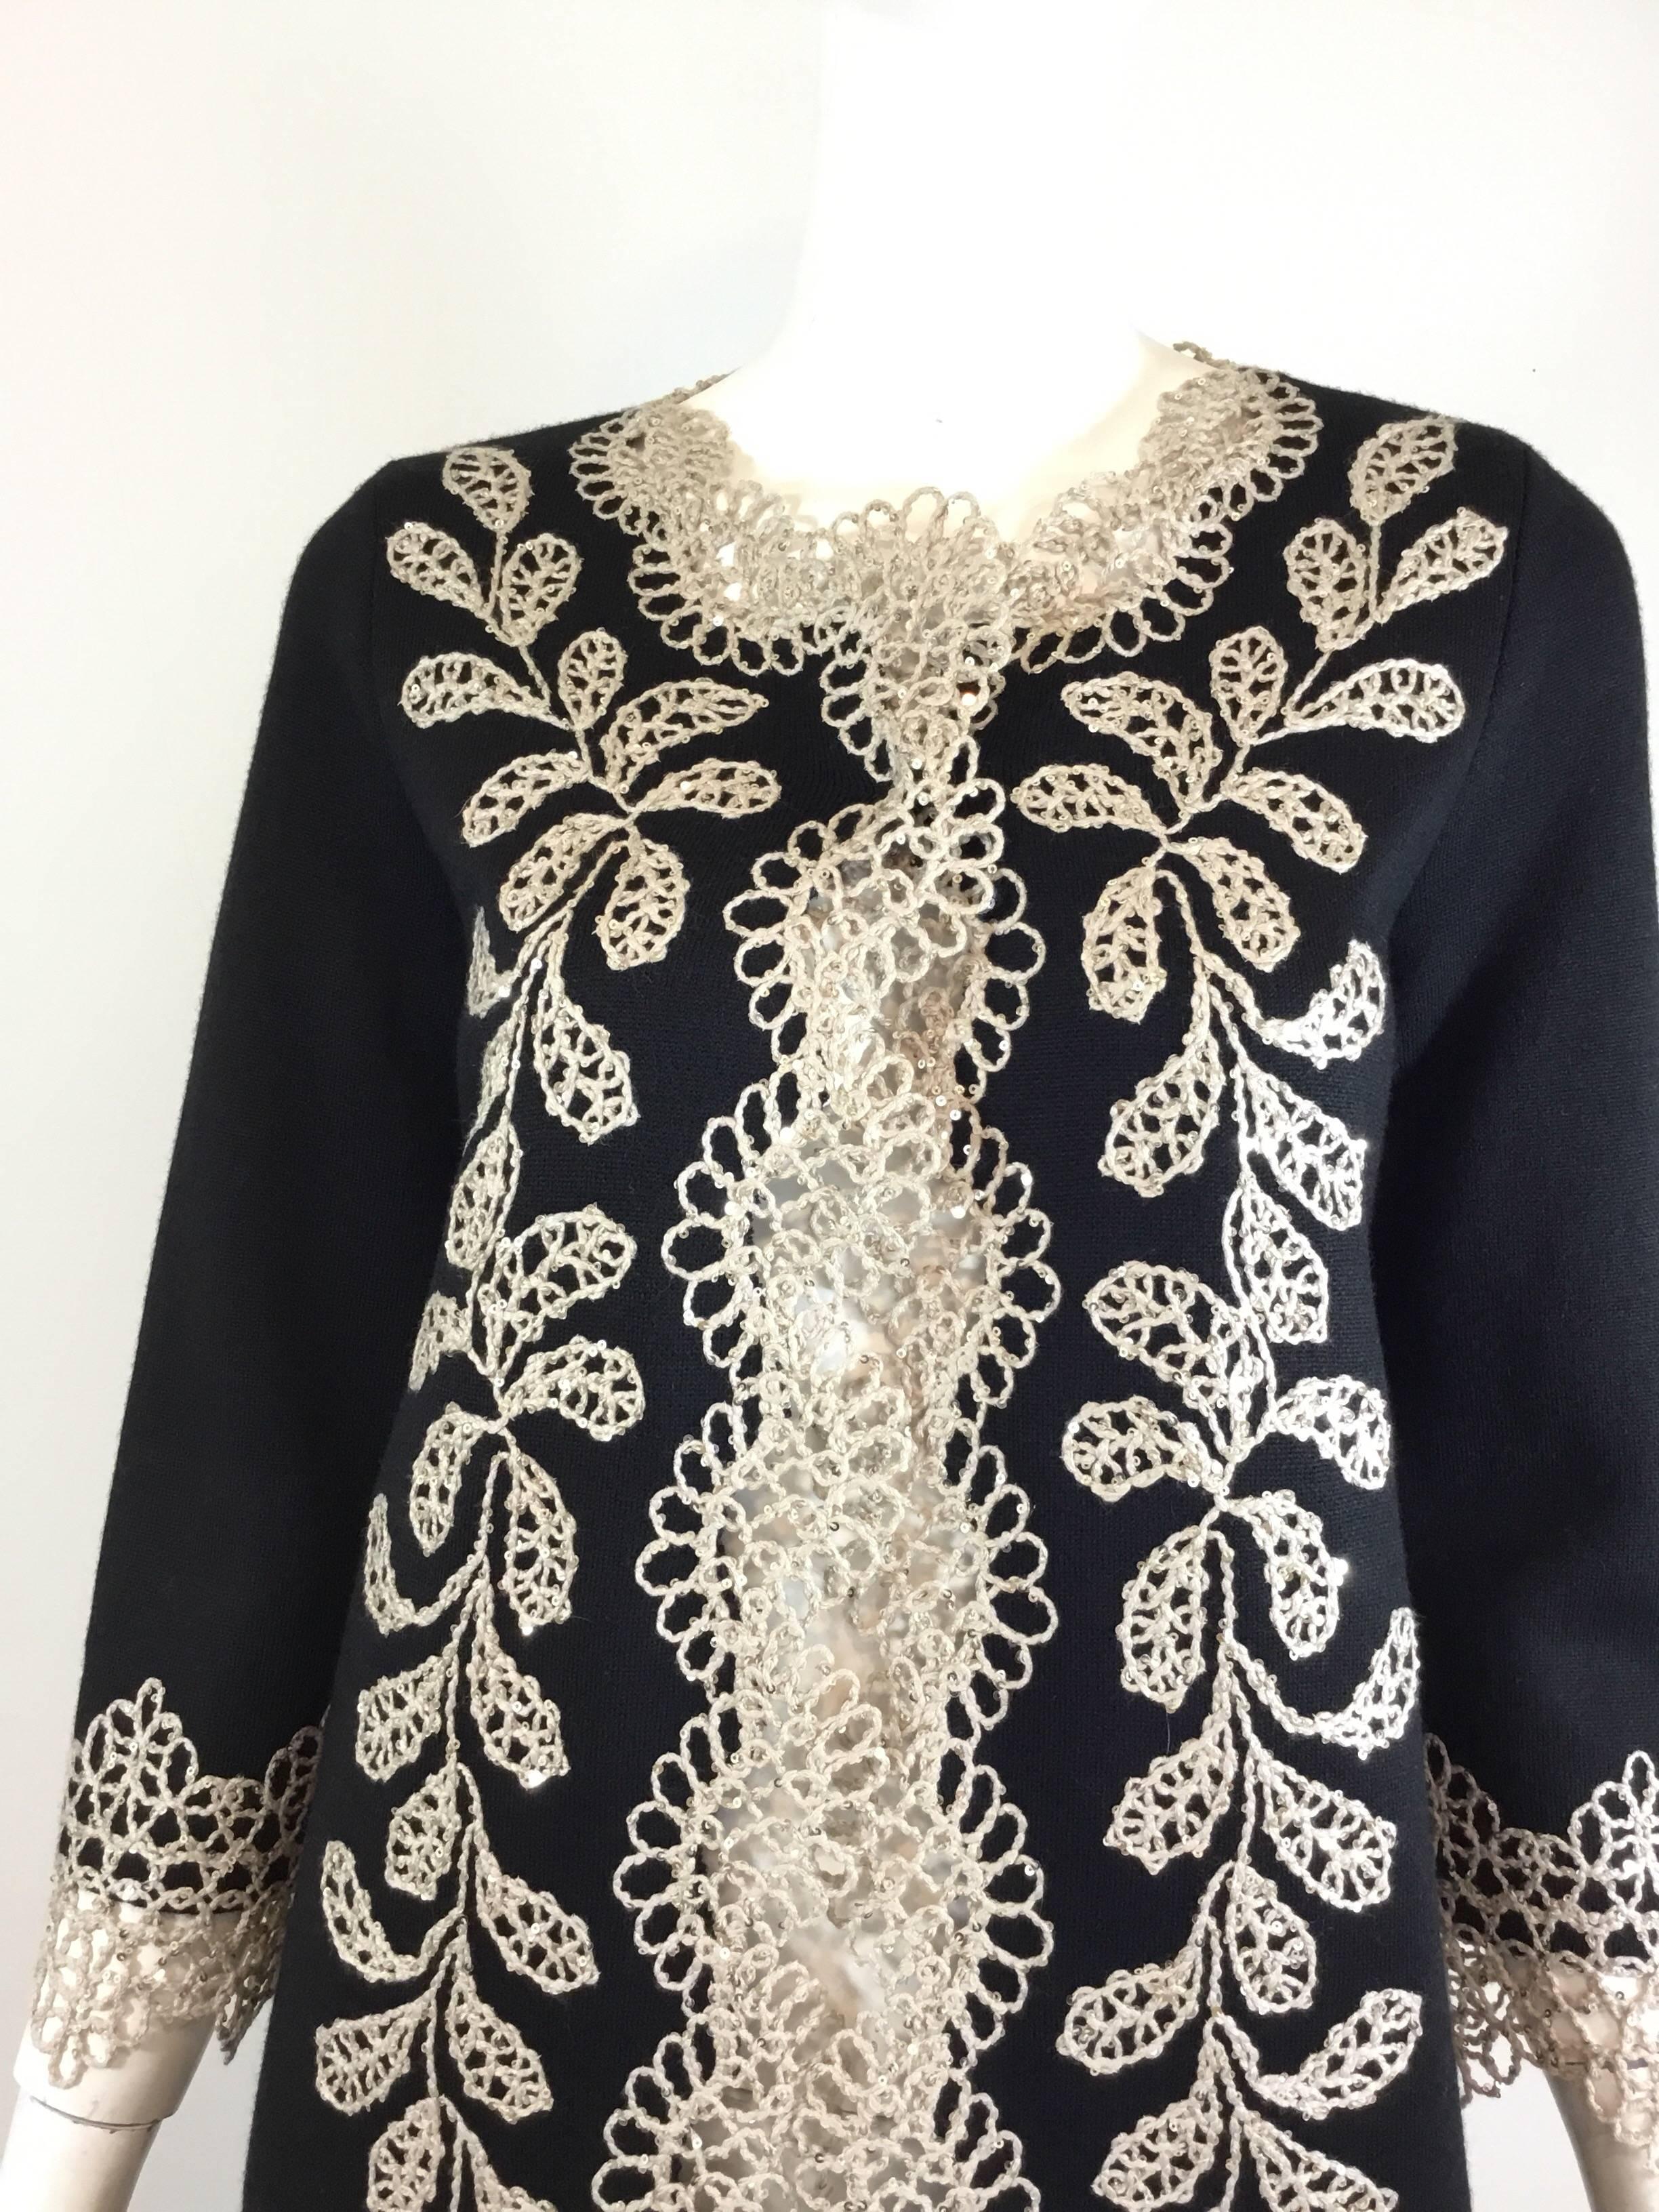 Oscar de la Renta long knit duster coat in black with a beige crochet trimming with sequins throughout the trim. Very nice quality densely woven (will not pill) wool knit. Coat  has a single snap button closure. Labeled a size small, made in Italy,